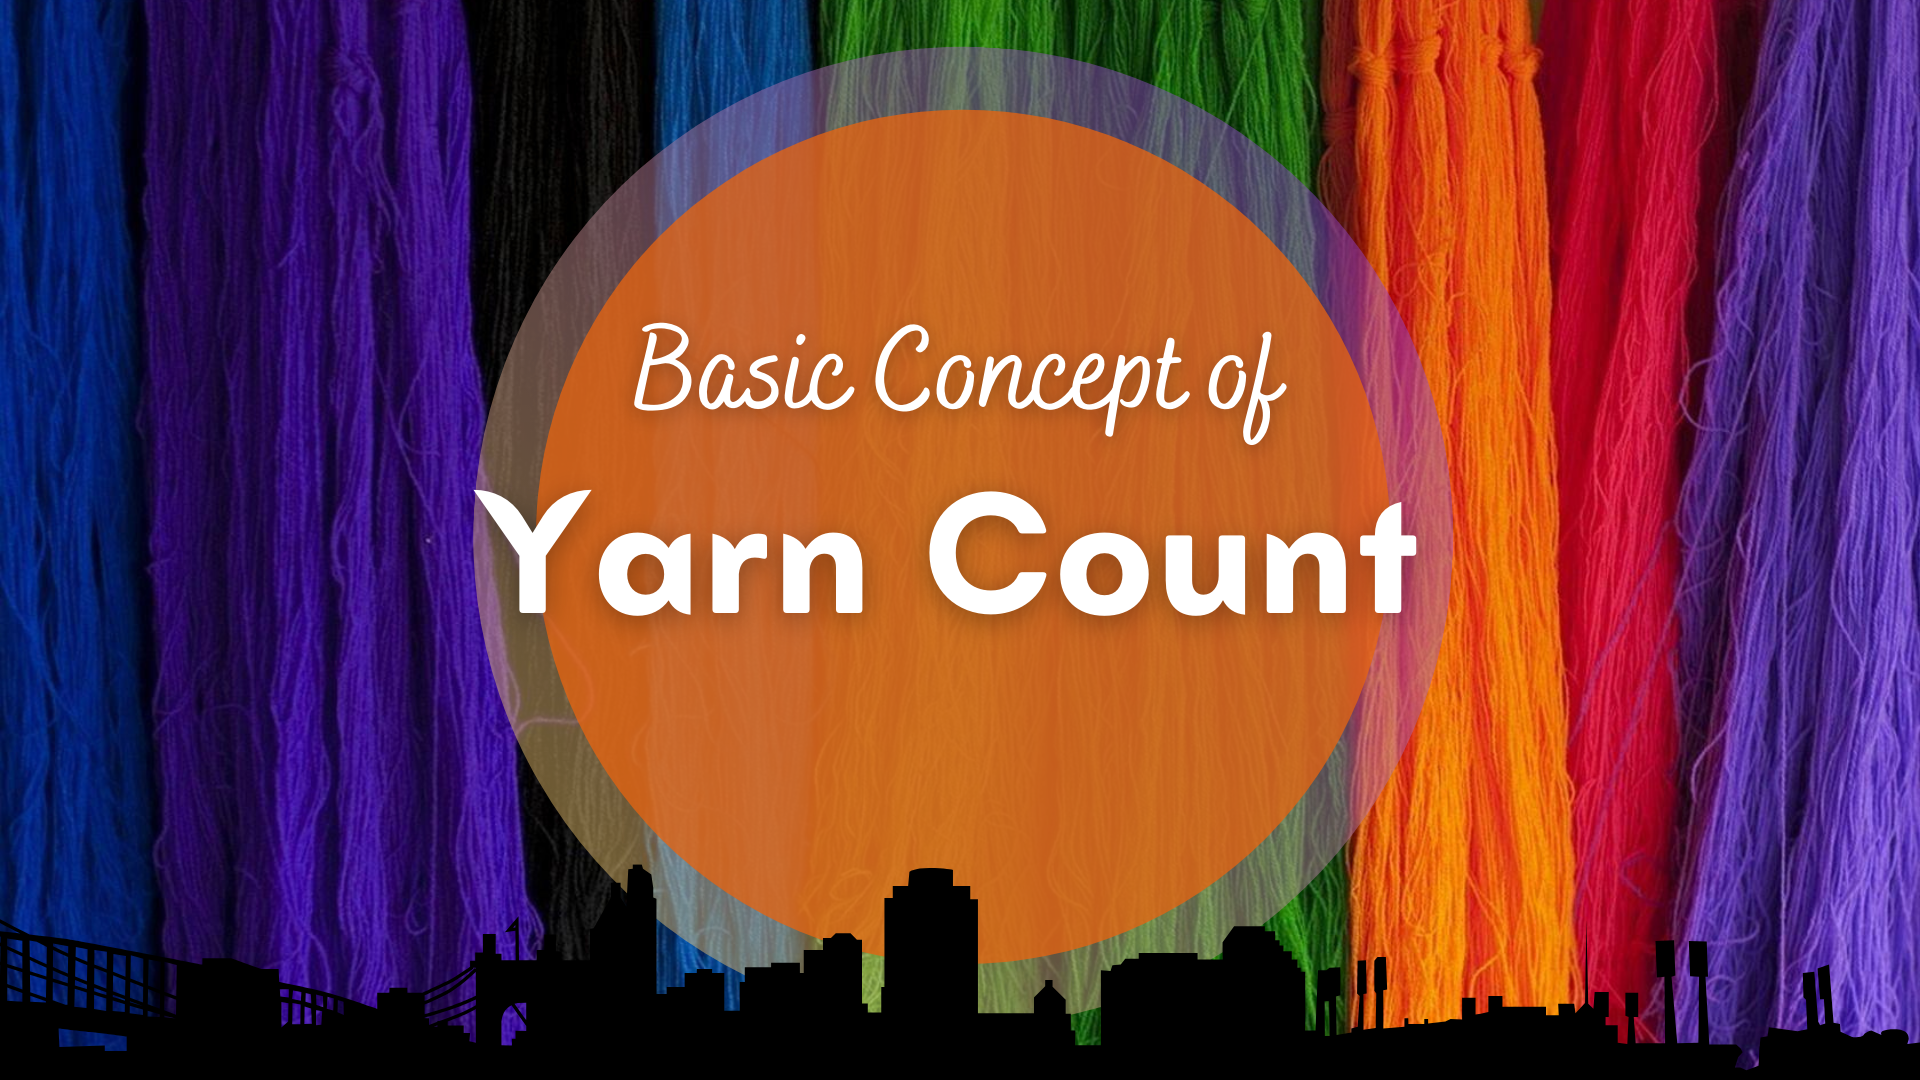 Basic Concept of Yarn Count course image